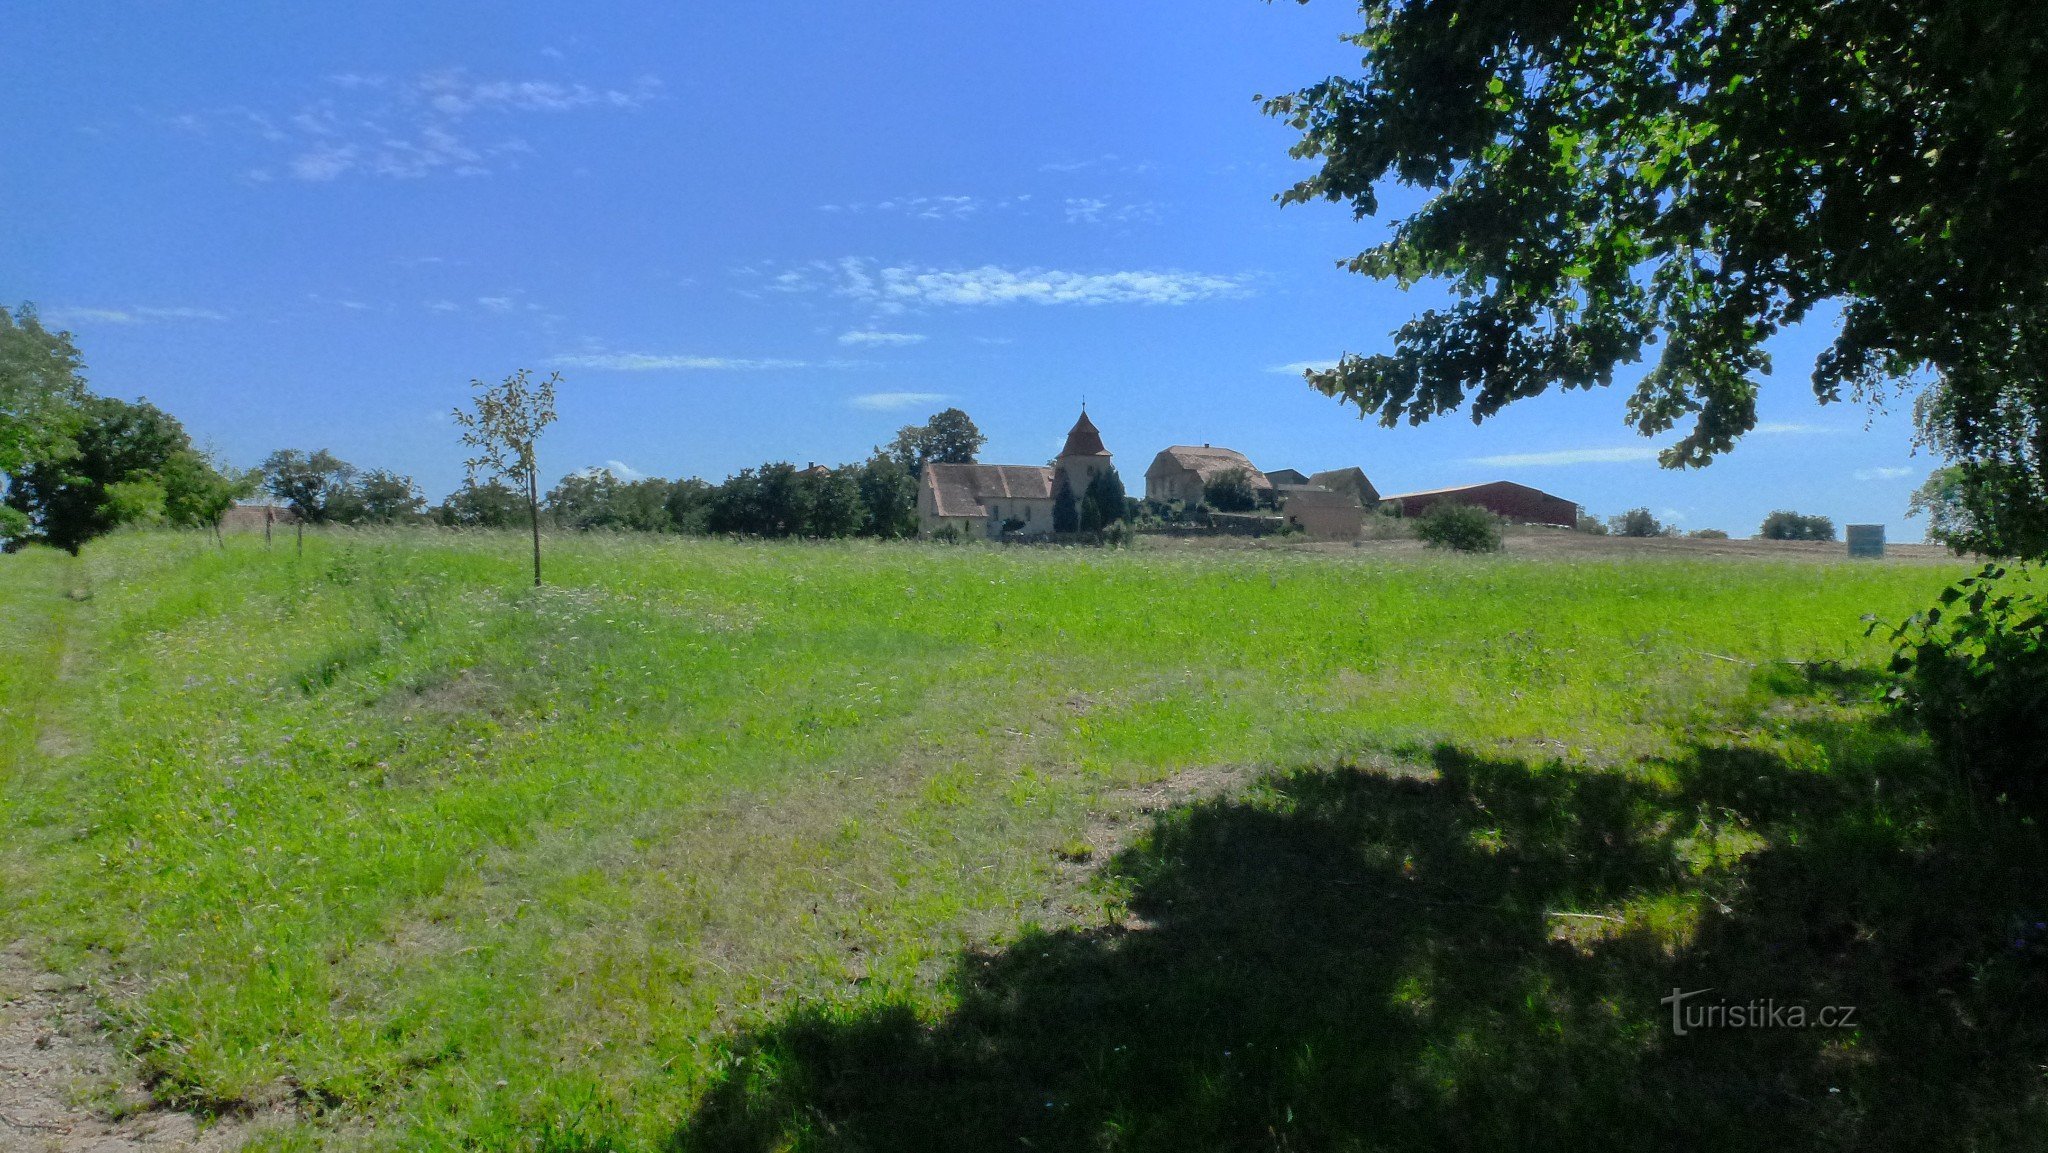 The dominant feature of the village is the early Gothic church of St. Martin, which is already mentioned